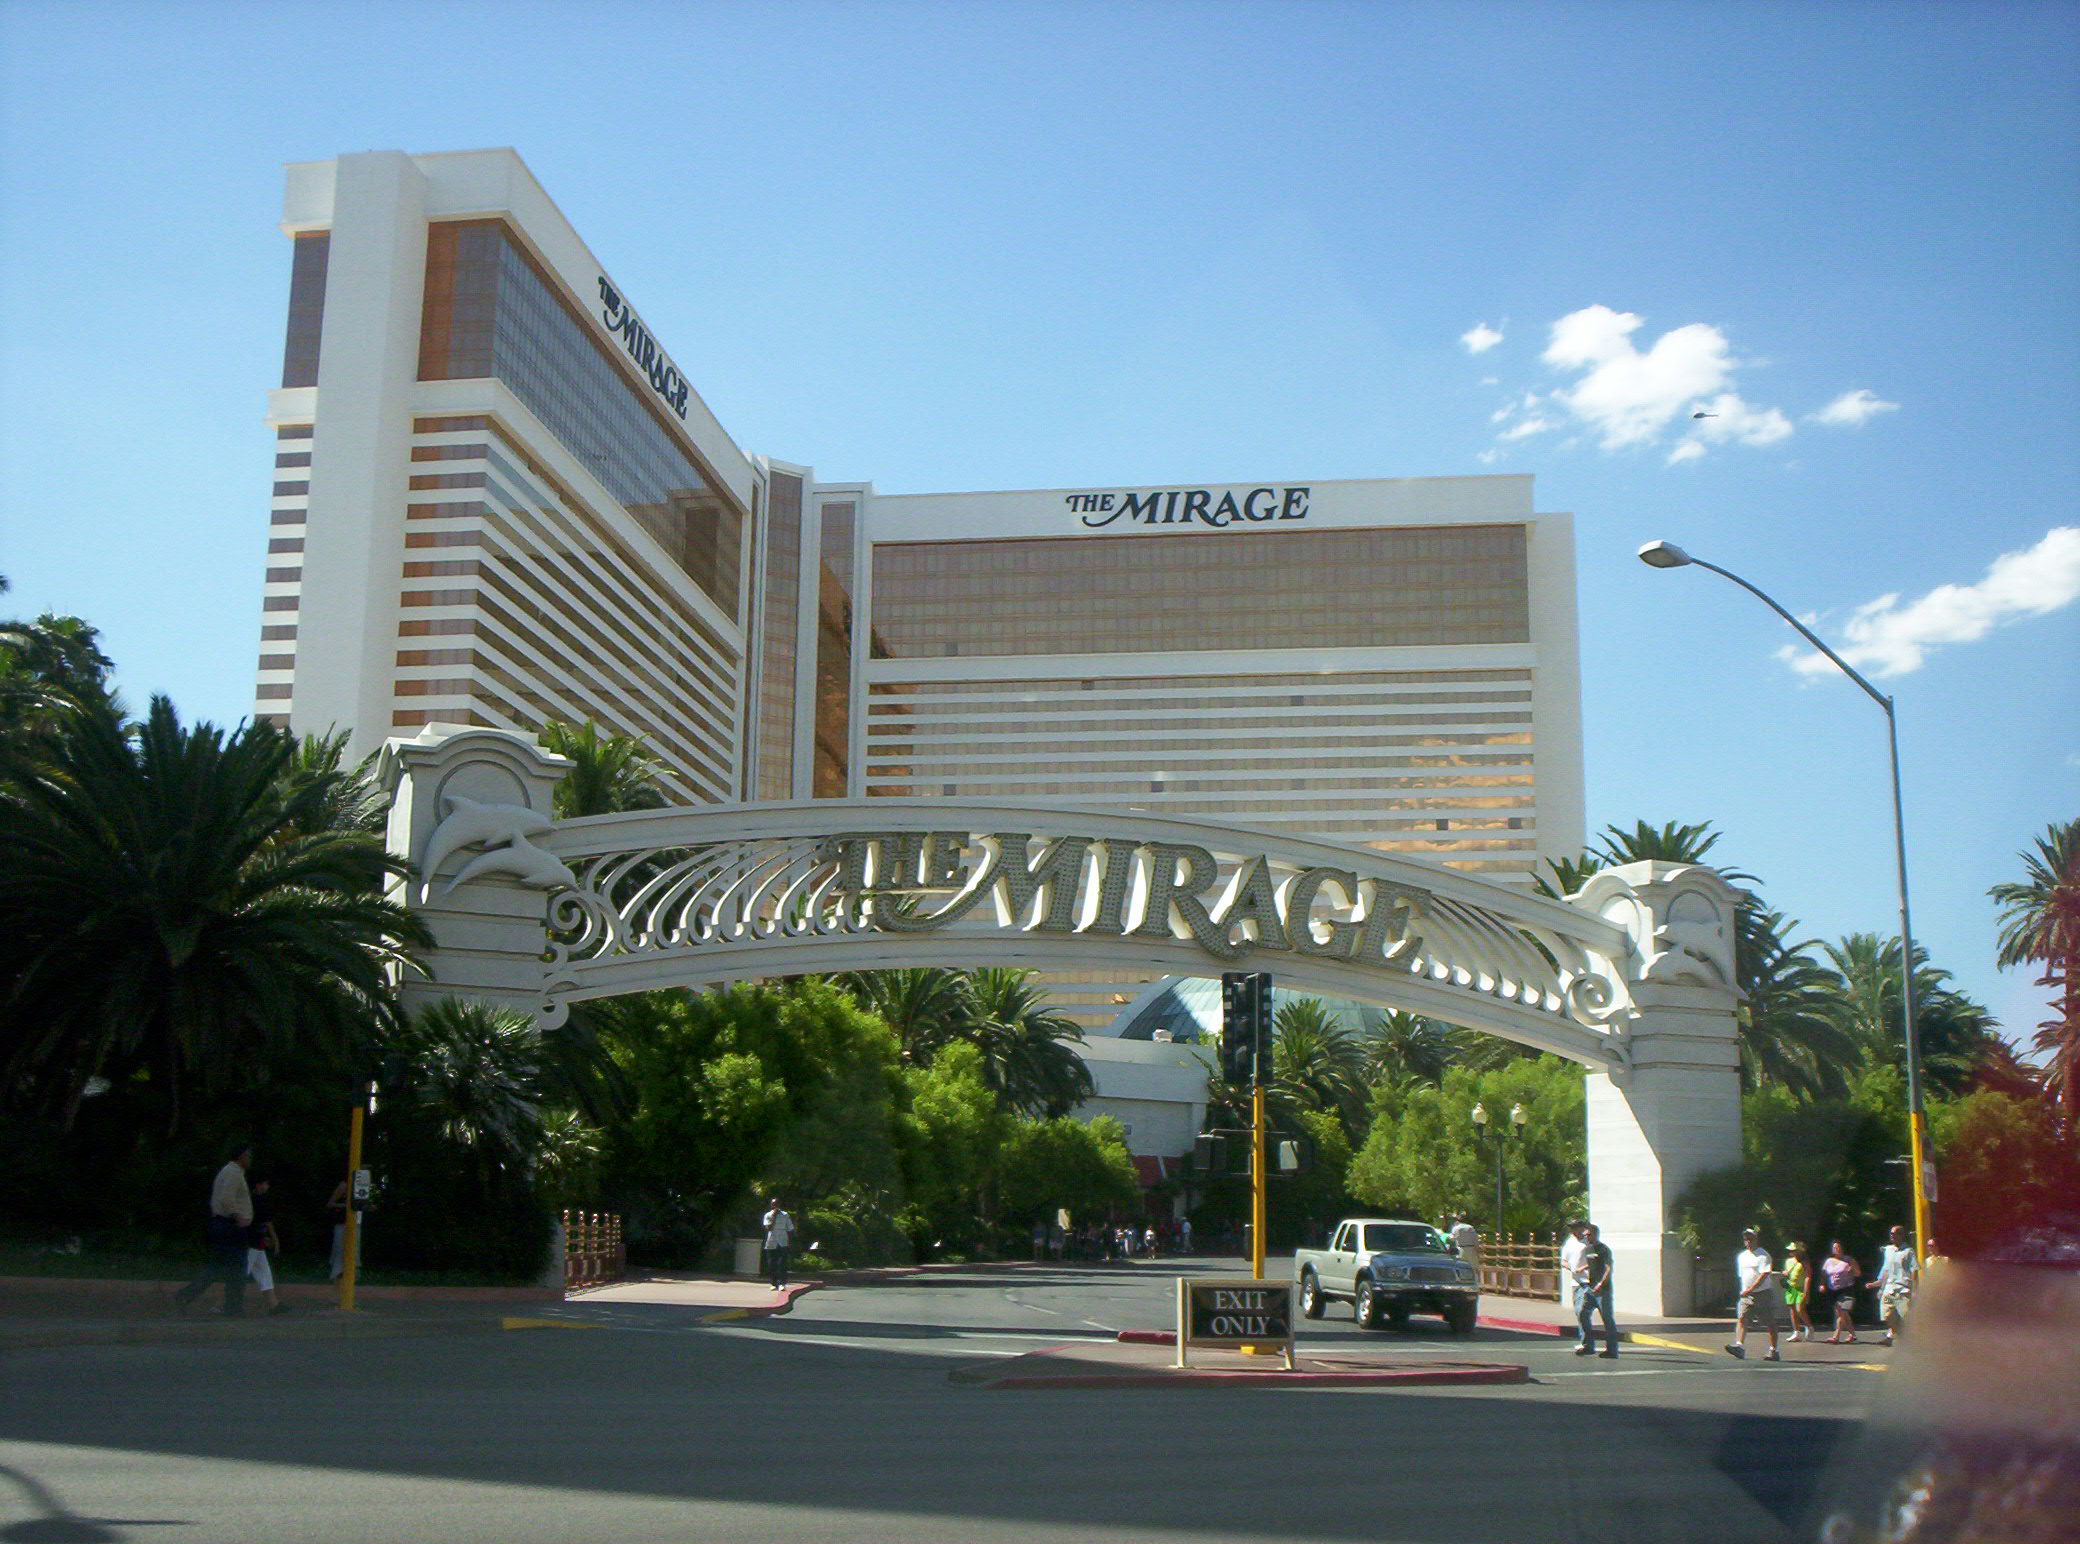 Map Of The Mirage Hotel Las Vegas Mirage Map - vrogue.co